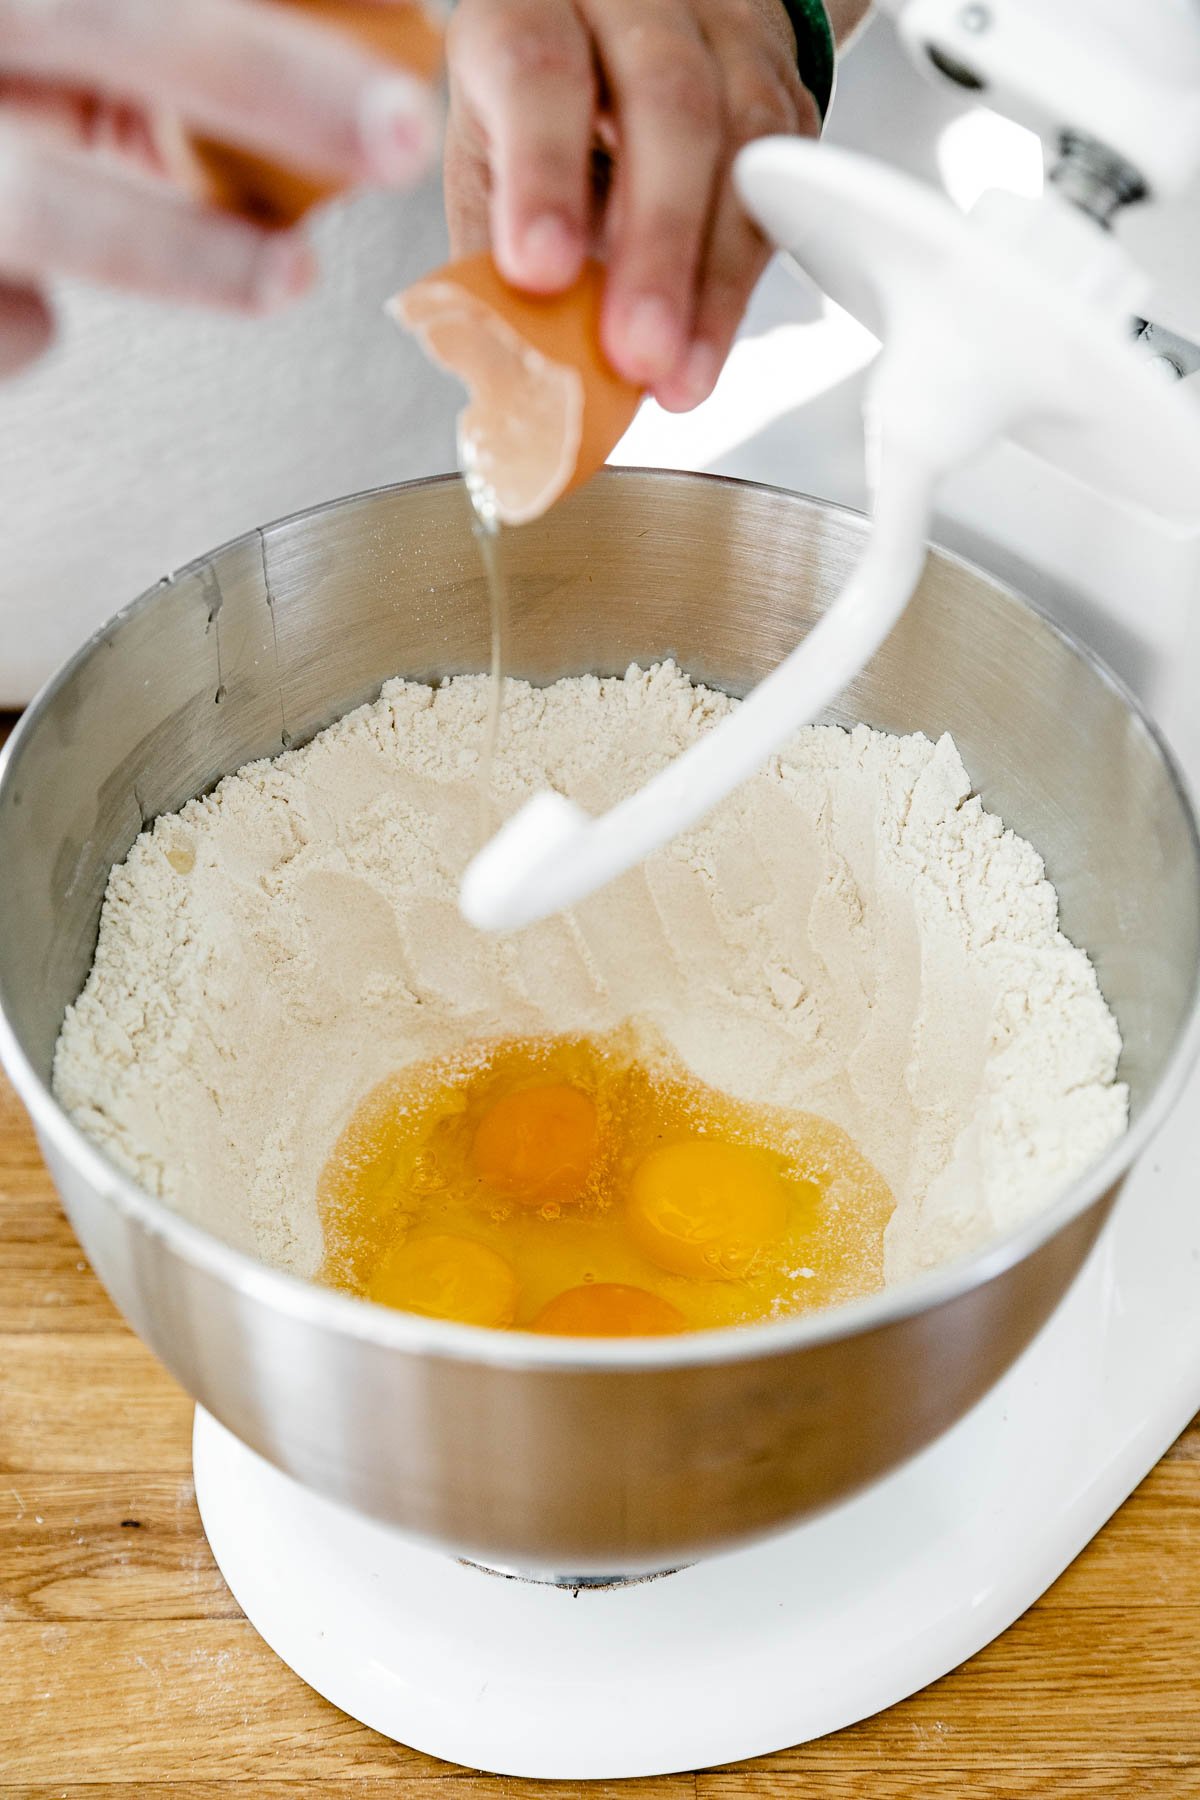 How to Make Fresh Pasta Dough with a Stand Mixer, Step 2: Mix the pasta dough. A woman's hand cracks a single egg into a well of flour formed inside mixing bowl of a white KitchenAid Stand Mixer. The dough attachment for the stand mixer is attached and is in the upright position. A few other eggs have already been added to the well of flour. The stand mixer rests atop a butcher block countertop.